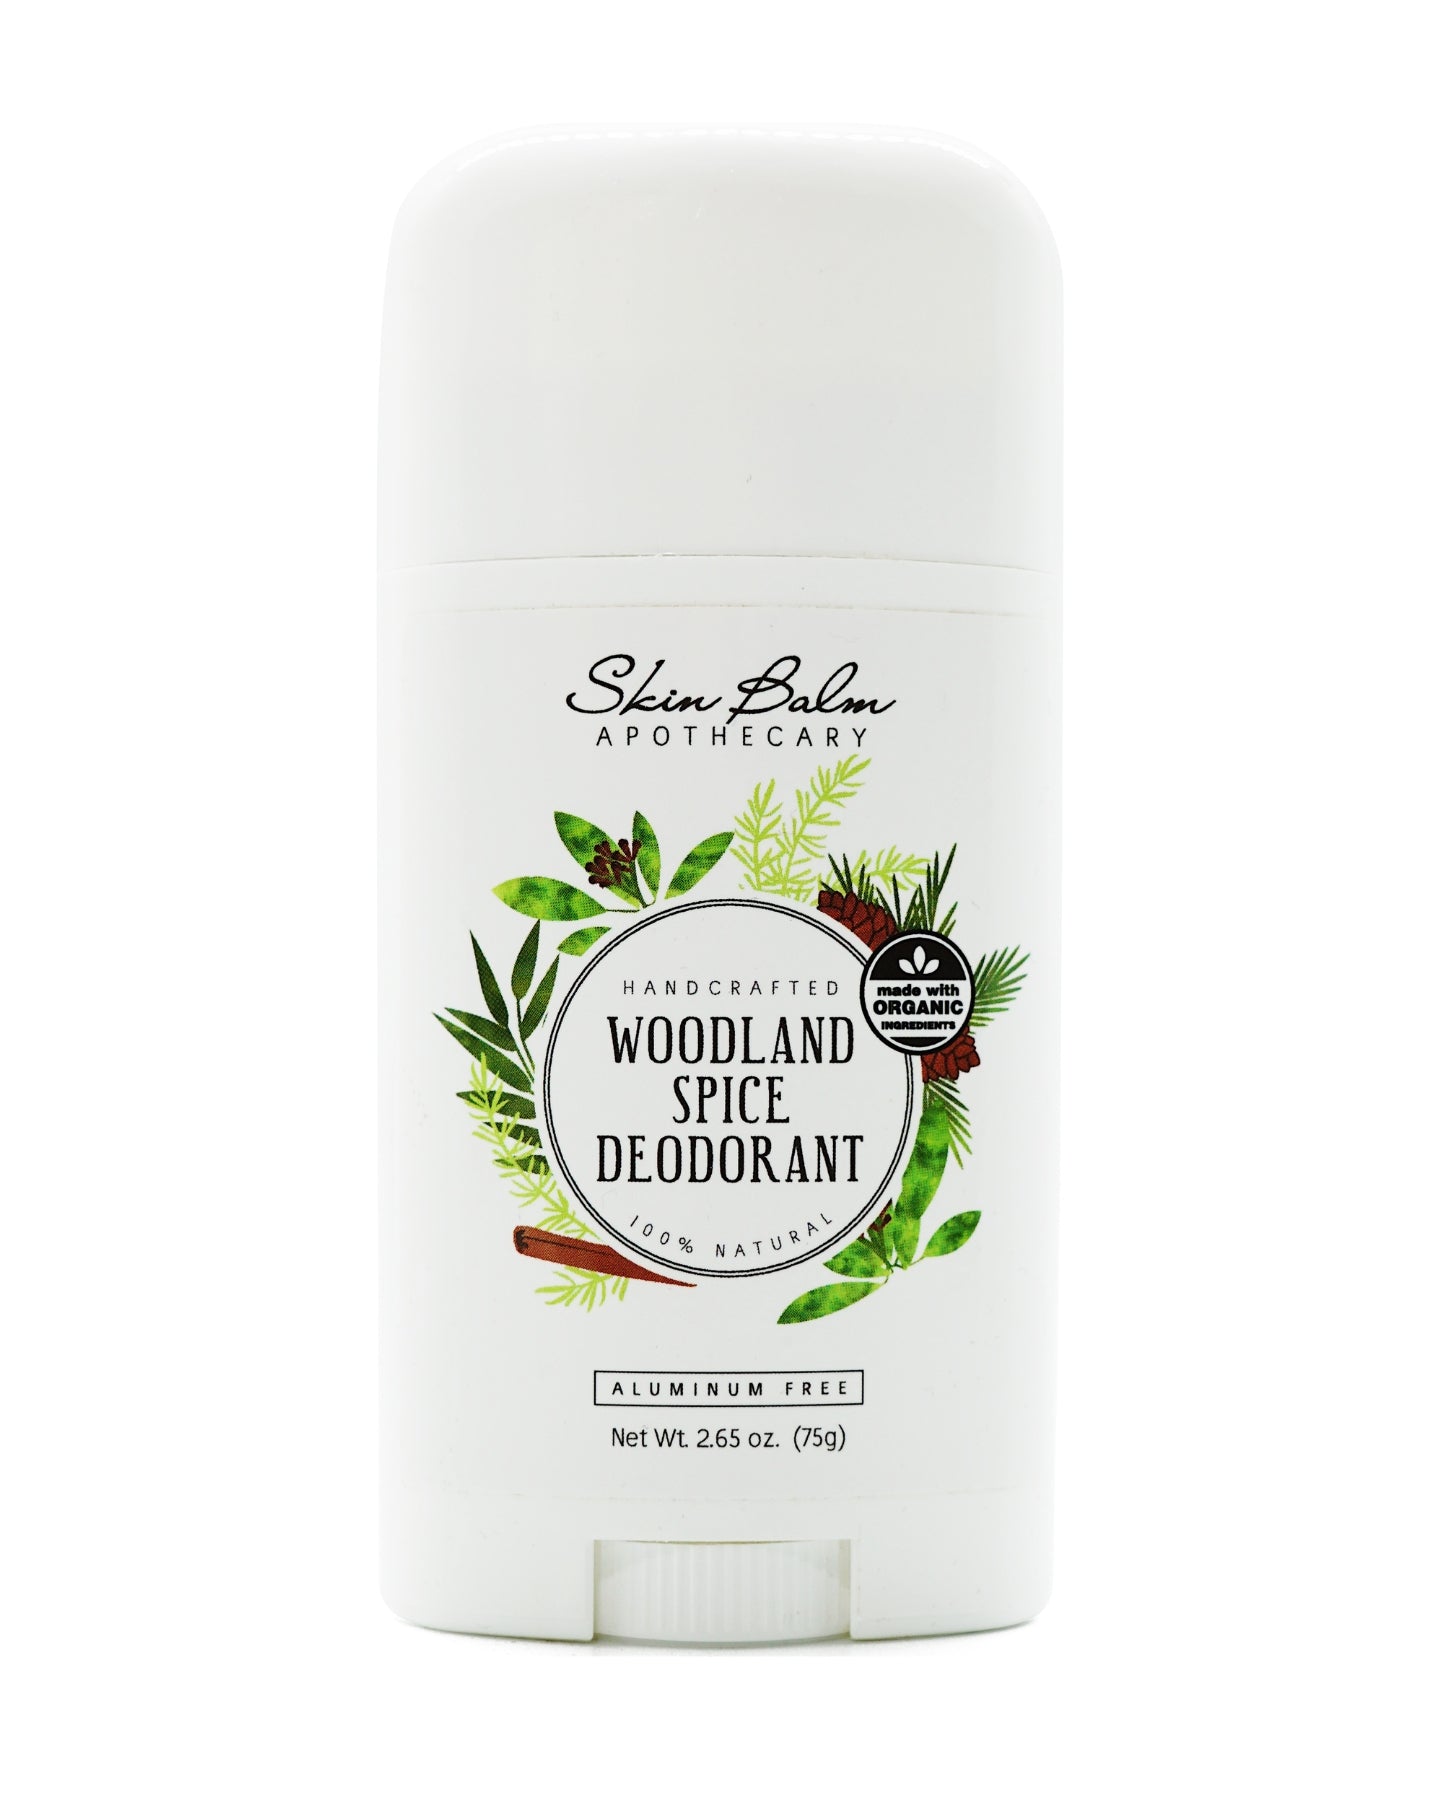 Woodland Spice Deodorant against a white background.